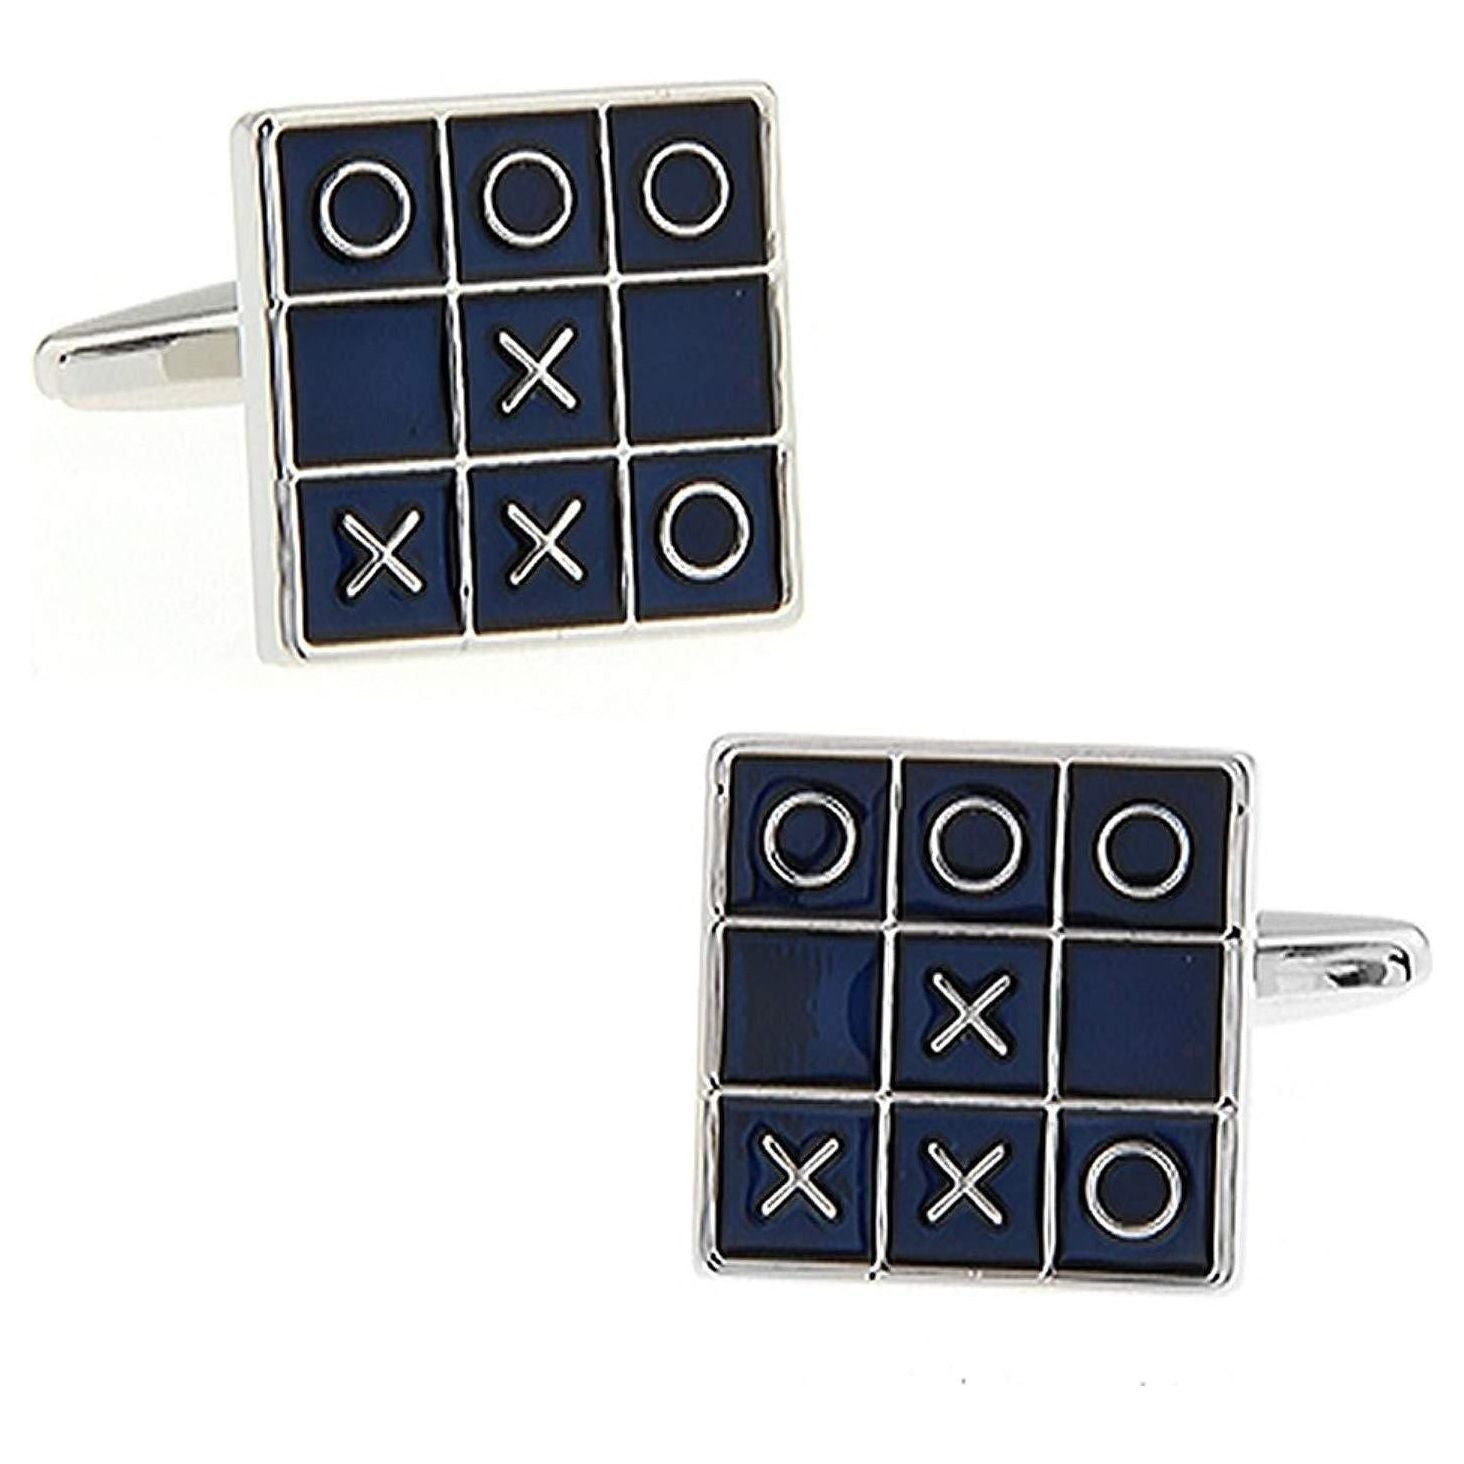 O's and Crosses Cufflinks - Ashton and Finch